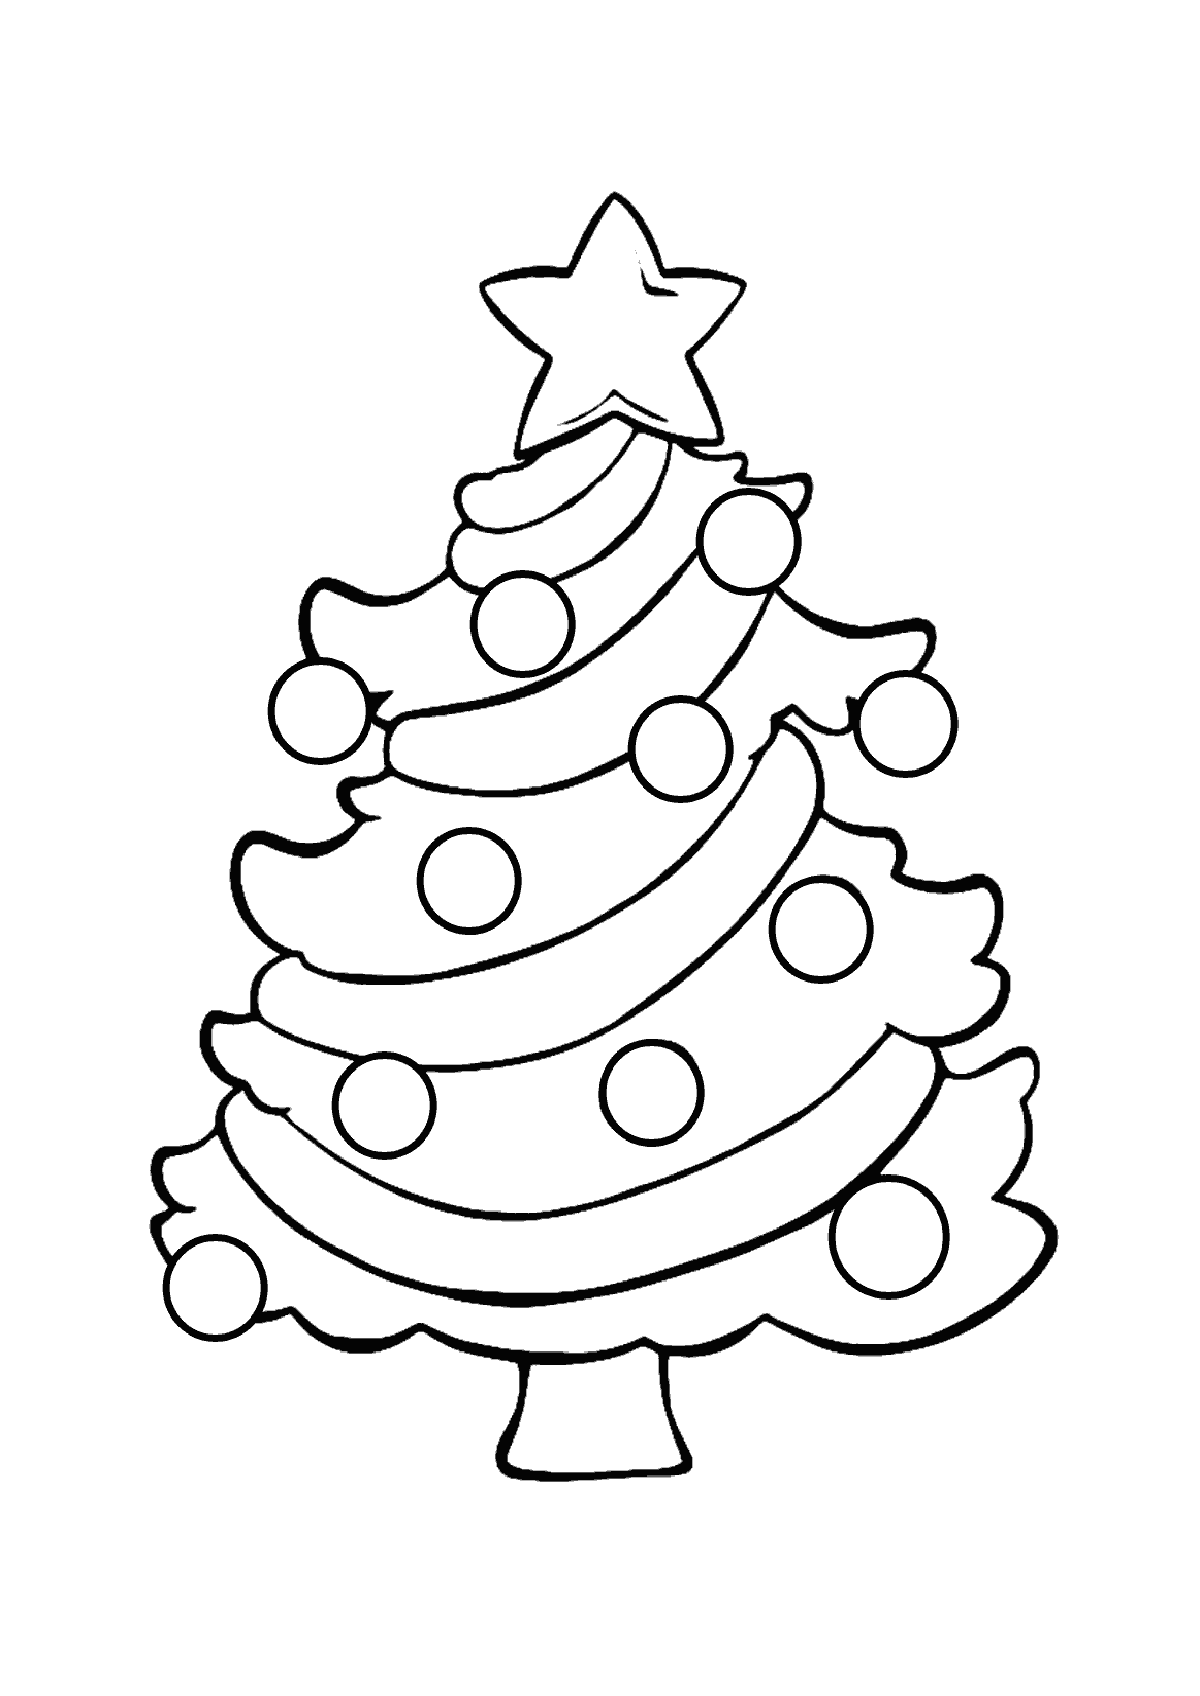 inesyfederico-clases-printable-coloring-christmas-trees